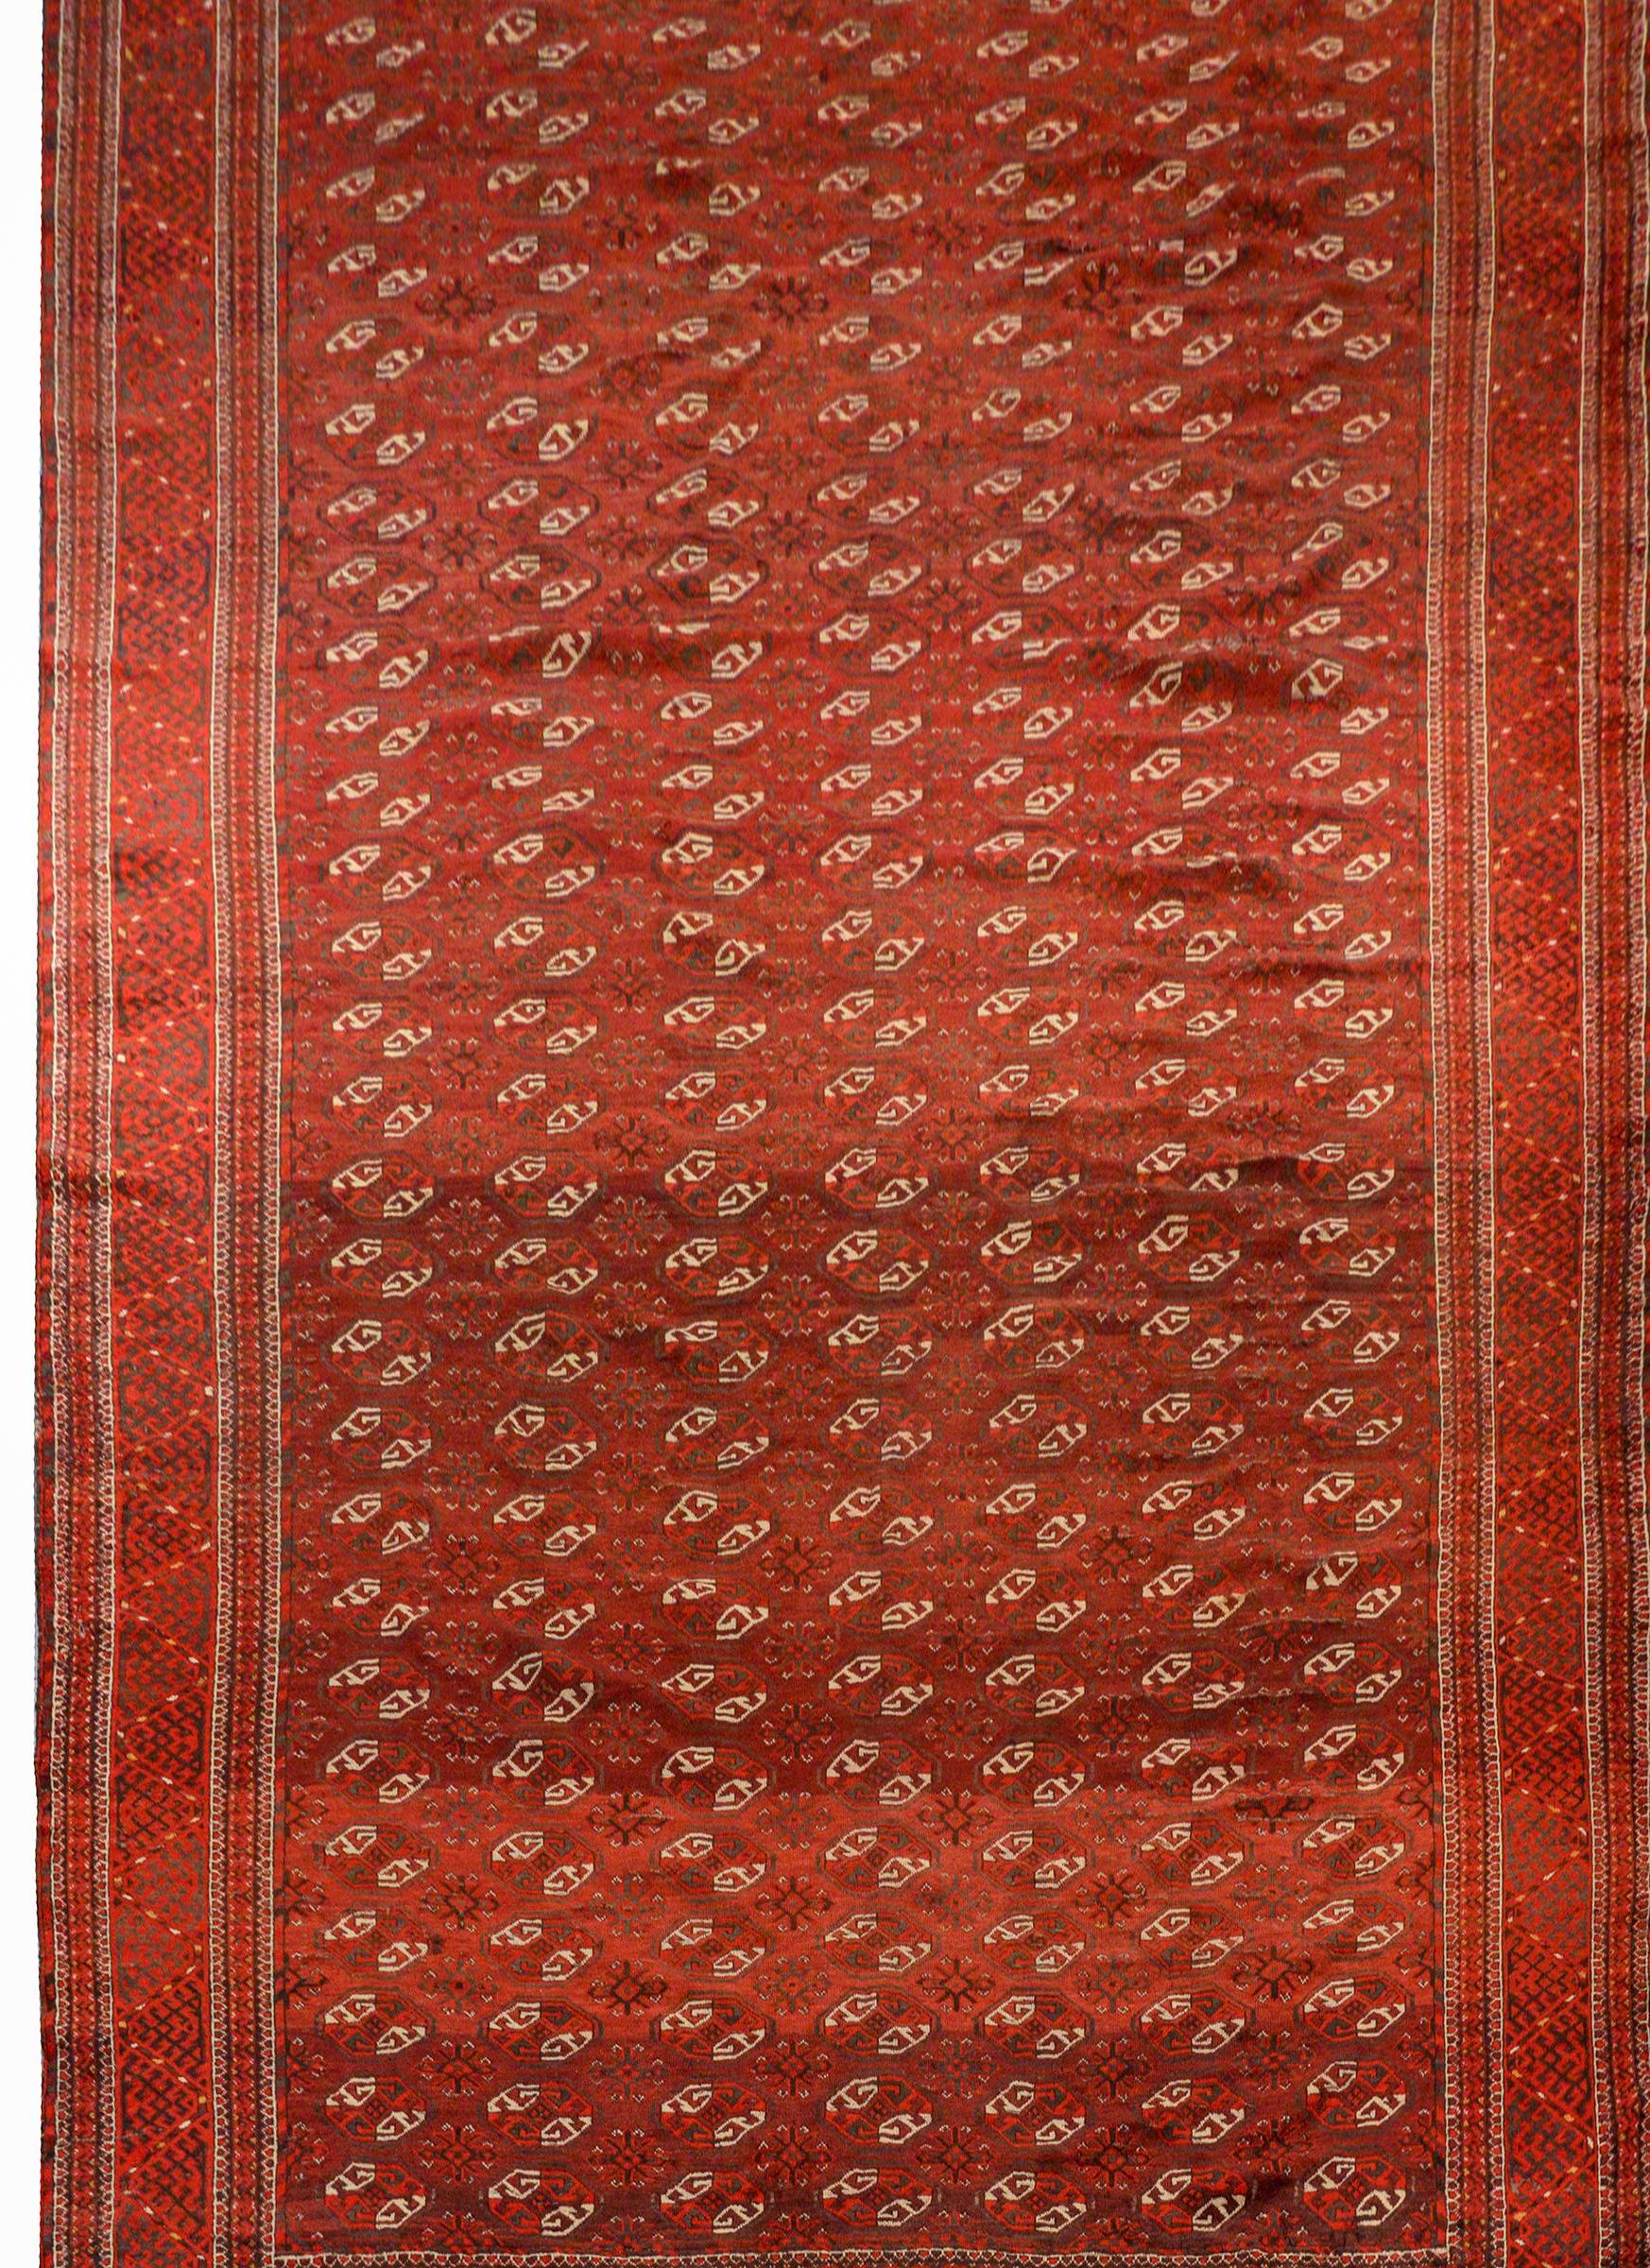 A wonderful early 20th century Persian Turkomen rug with an all-over pattern of crimson and white lozenge-shapes medallions on a crimson background, surrounded by an exceptional geometric stylized meandering motif patterned border.